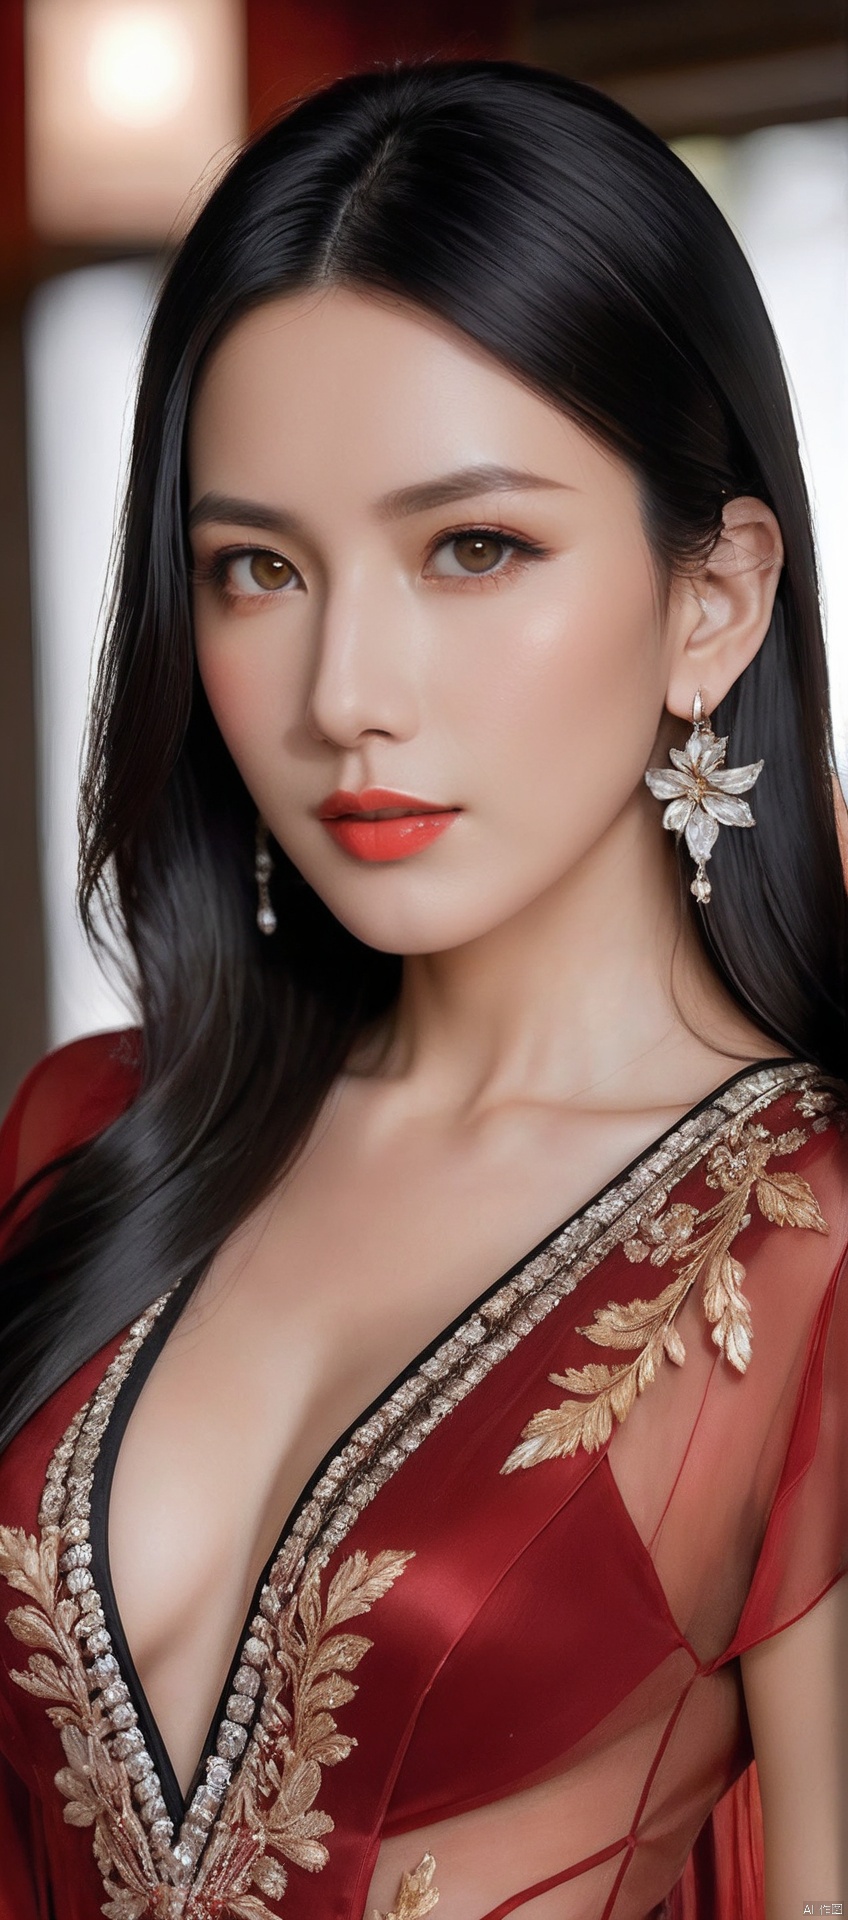 8k,RAW, Fujifilm XT3, masterpiece, best quality, photorealistic,1girl,solo, diamond stud earrings, long straight black hair, hazel eyes, serious expression, slender figure,(upper body shot), (upper body view),dodger red see through dress,red transparent shawl,beautiful symmetrical face,in the style of elegant clothing,high heels,g002,g001,